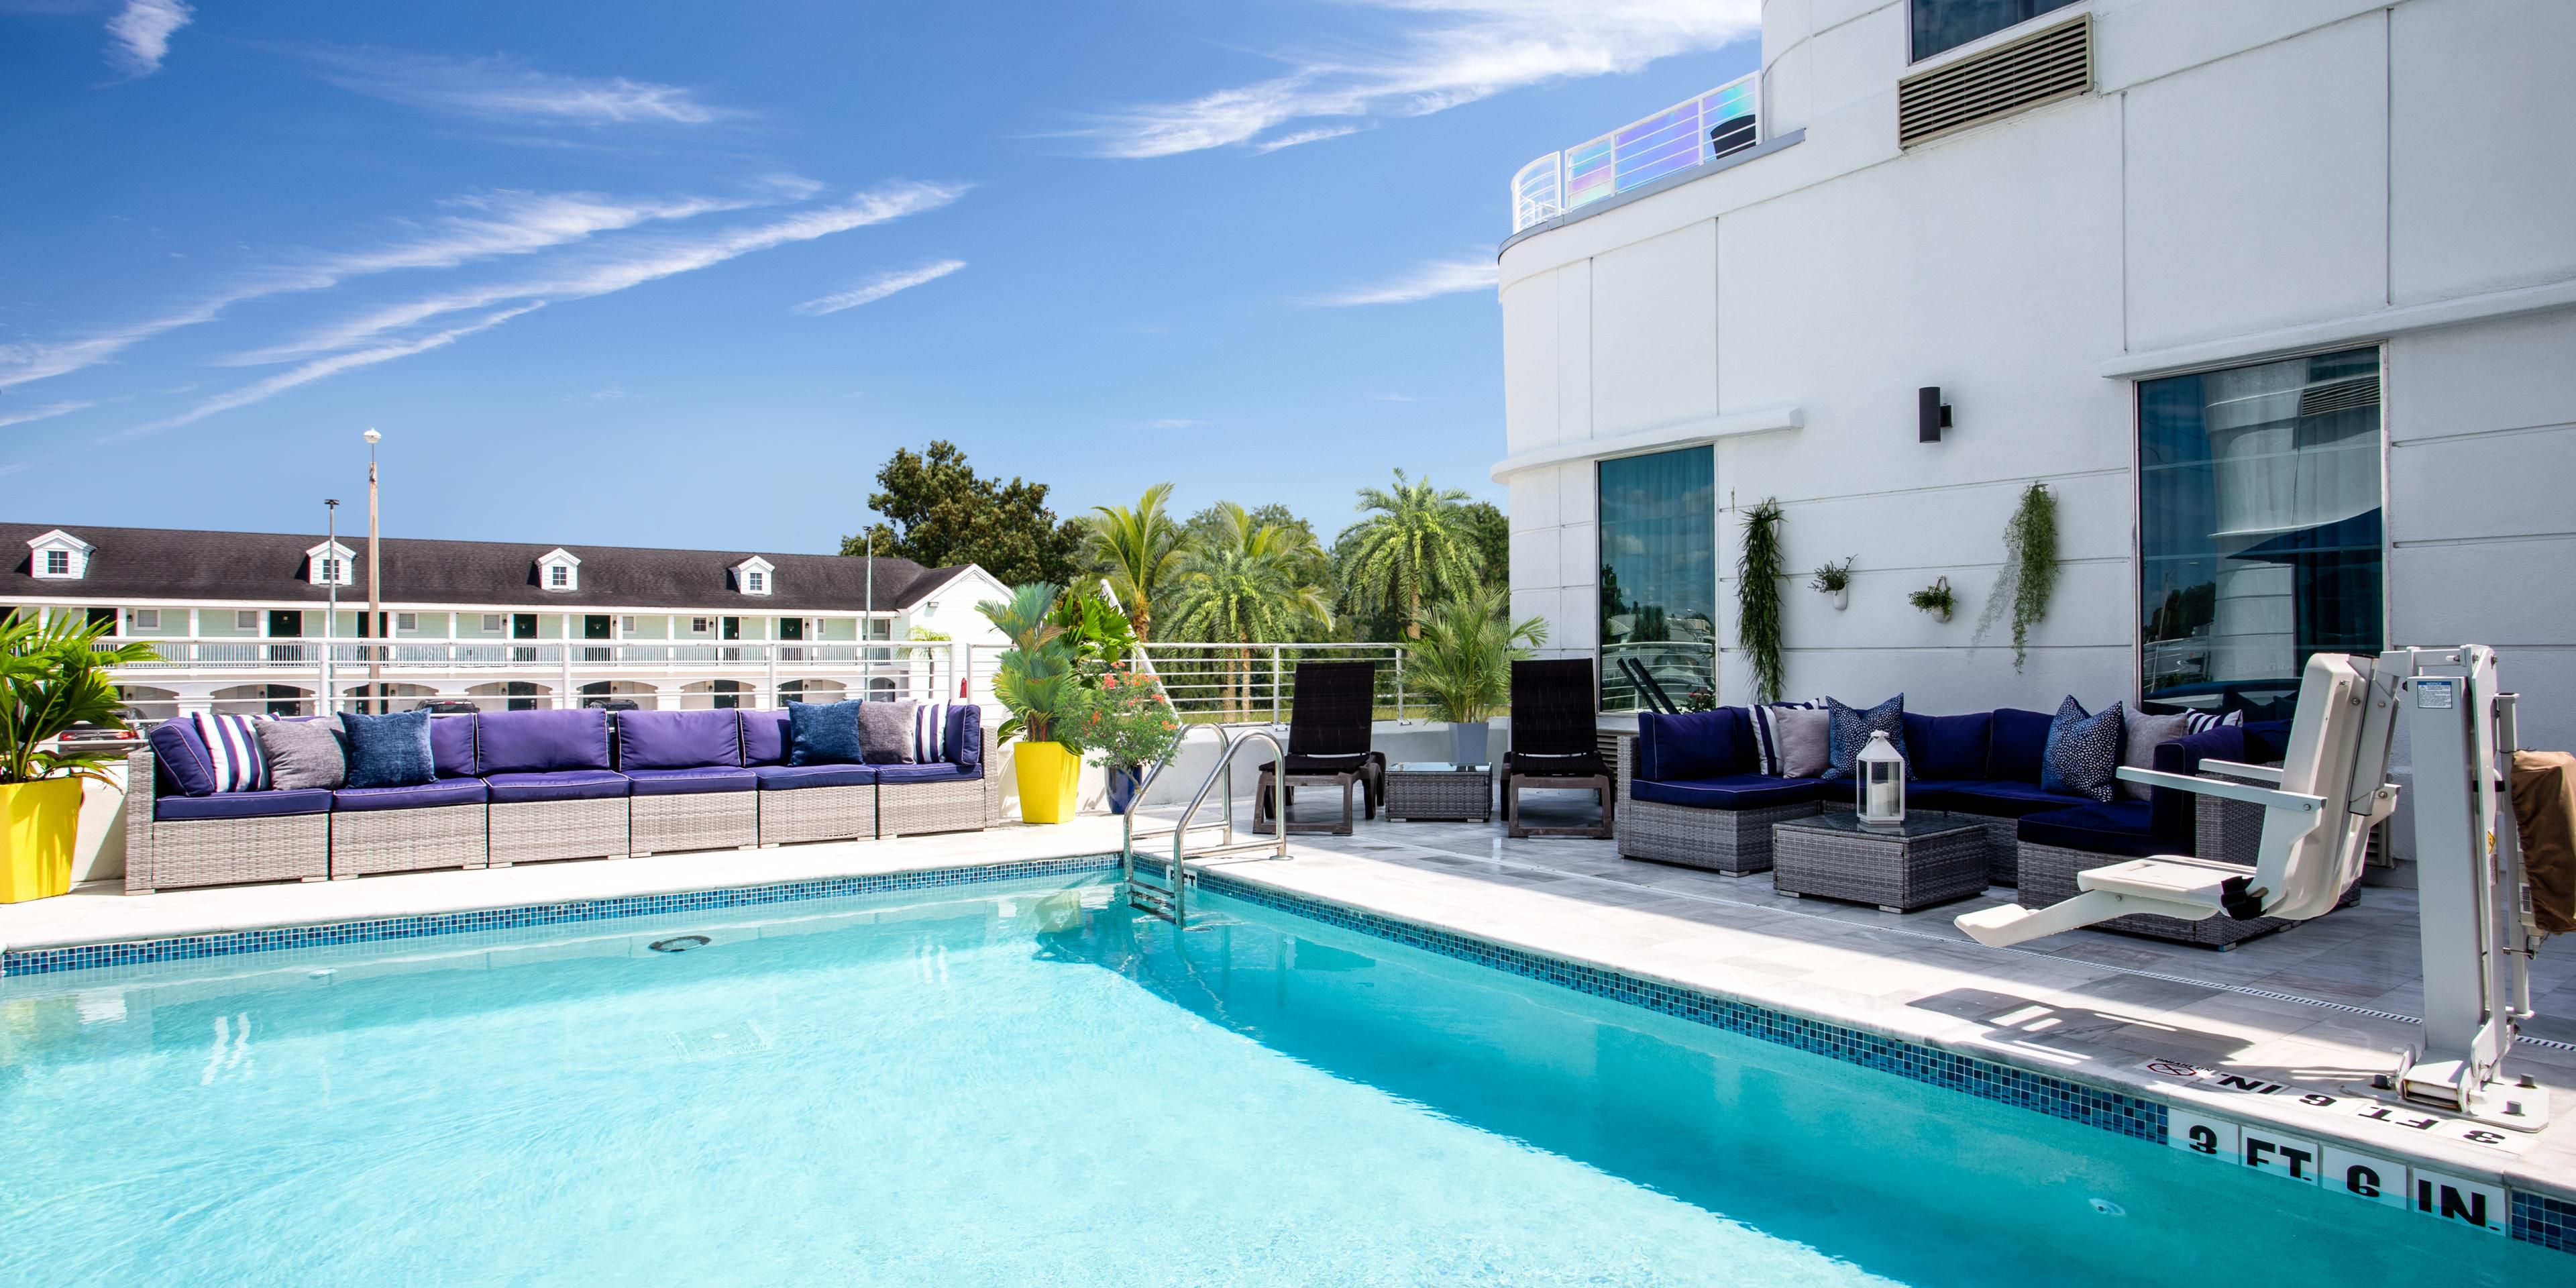 Our St Augustine hotel with rooftop pool overlooks A1A.